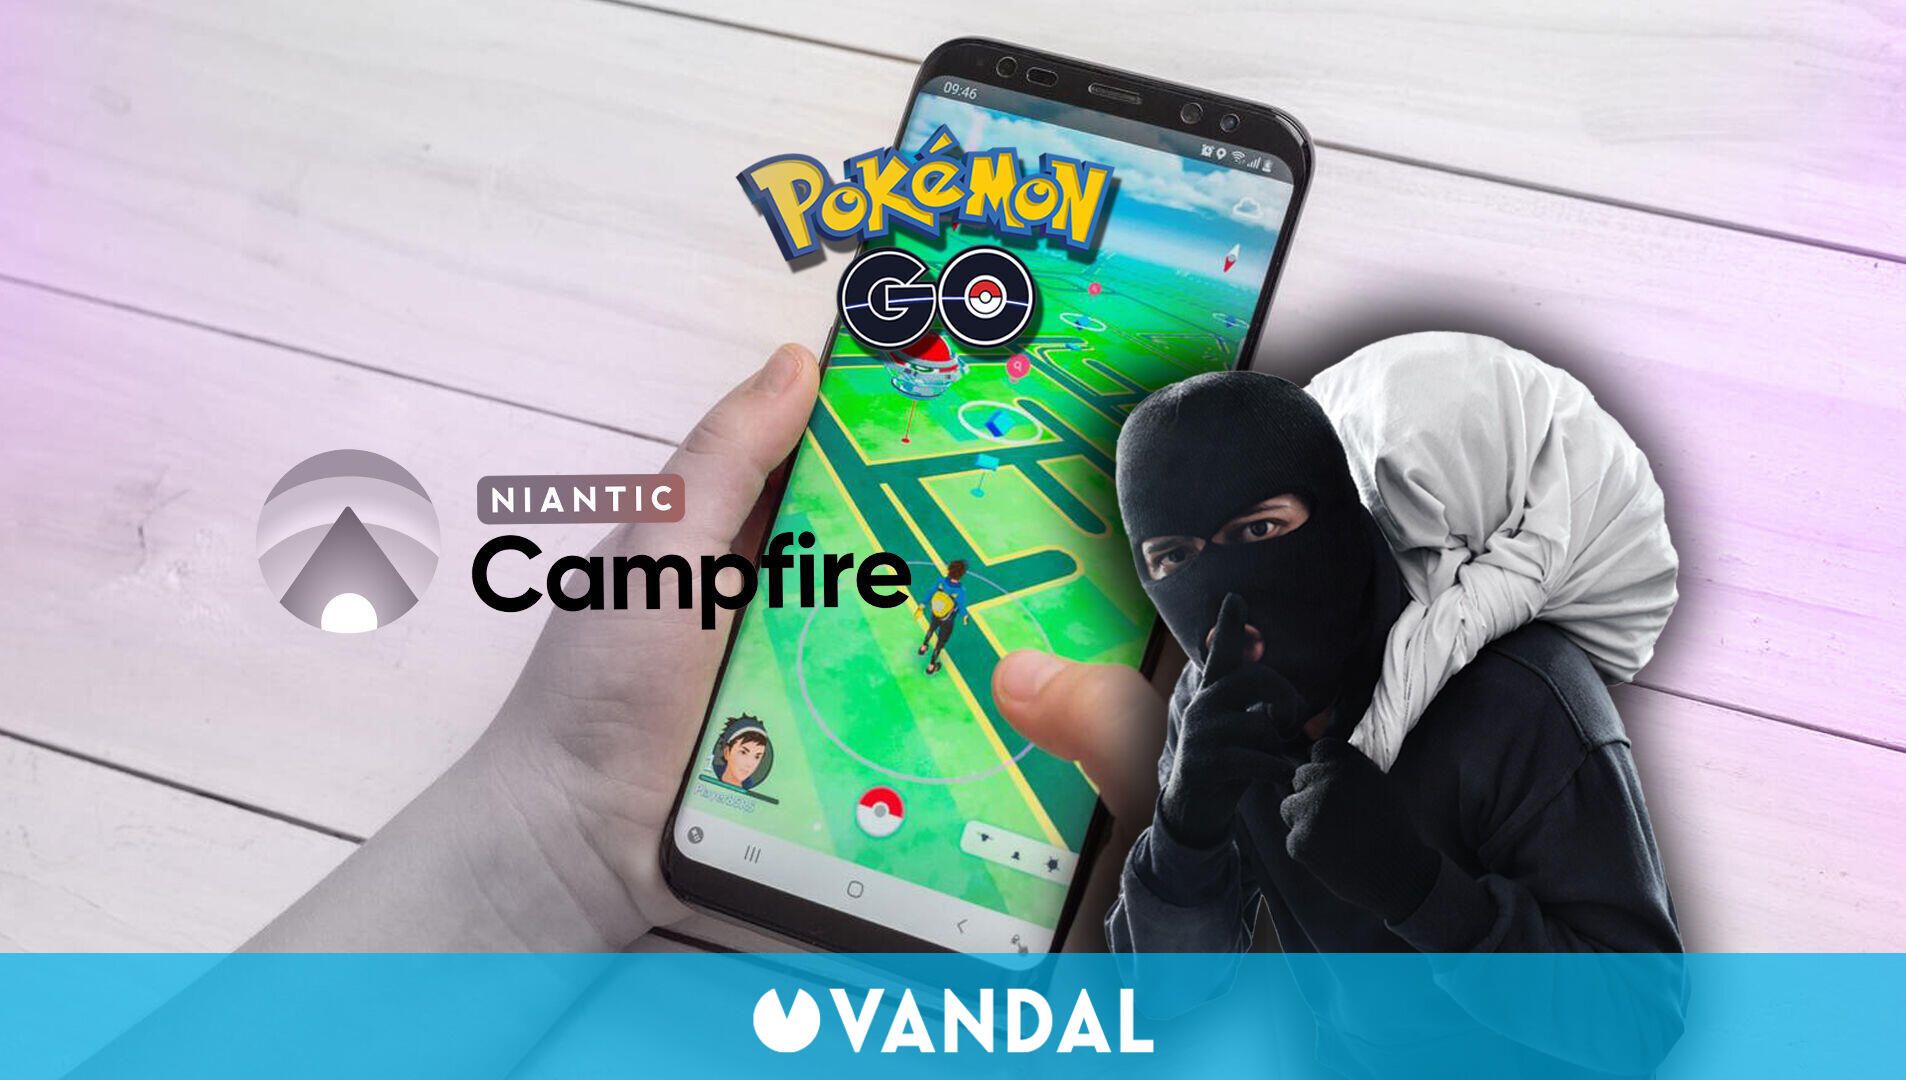 Pokémon GO players have reported getting robbed when using Campfire